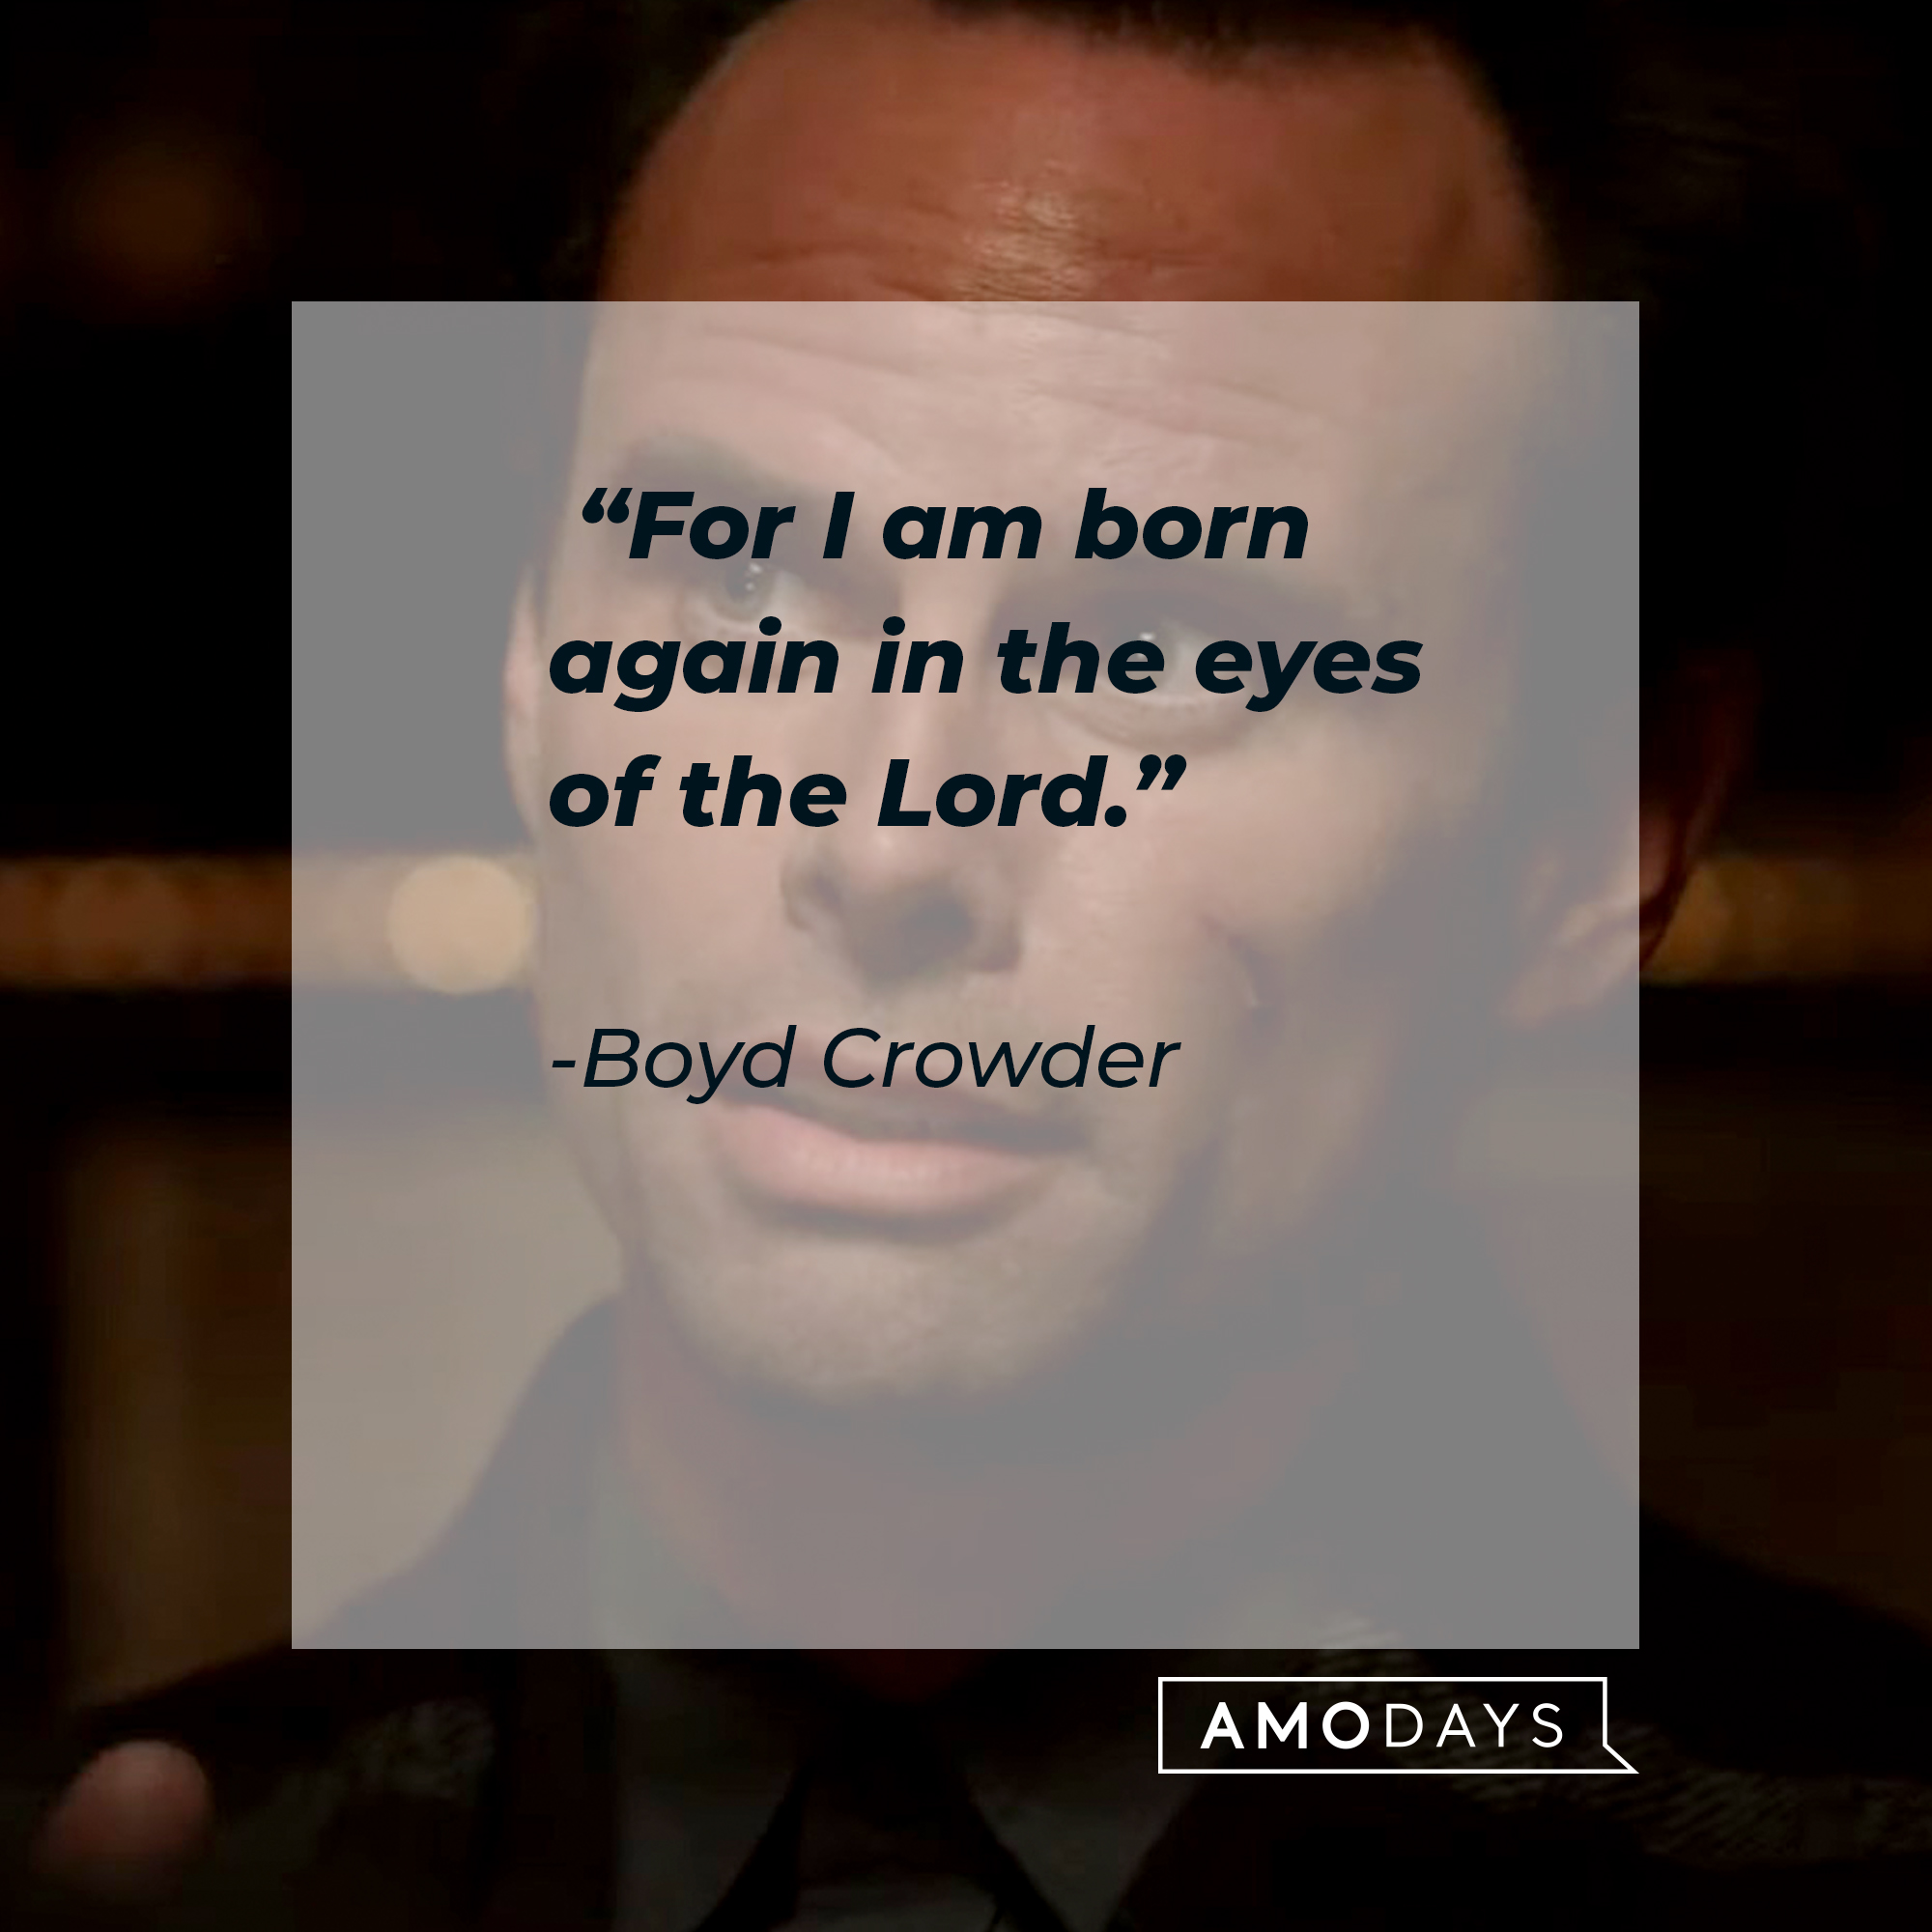 An image of  Boyd Crowder with his quote: “For I am born again in the eyes of the Lord.” | Source:  youtube.com/FXNetworks